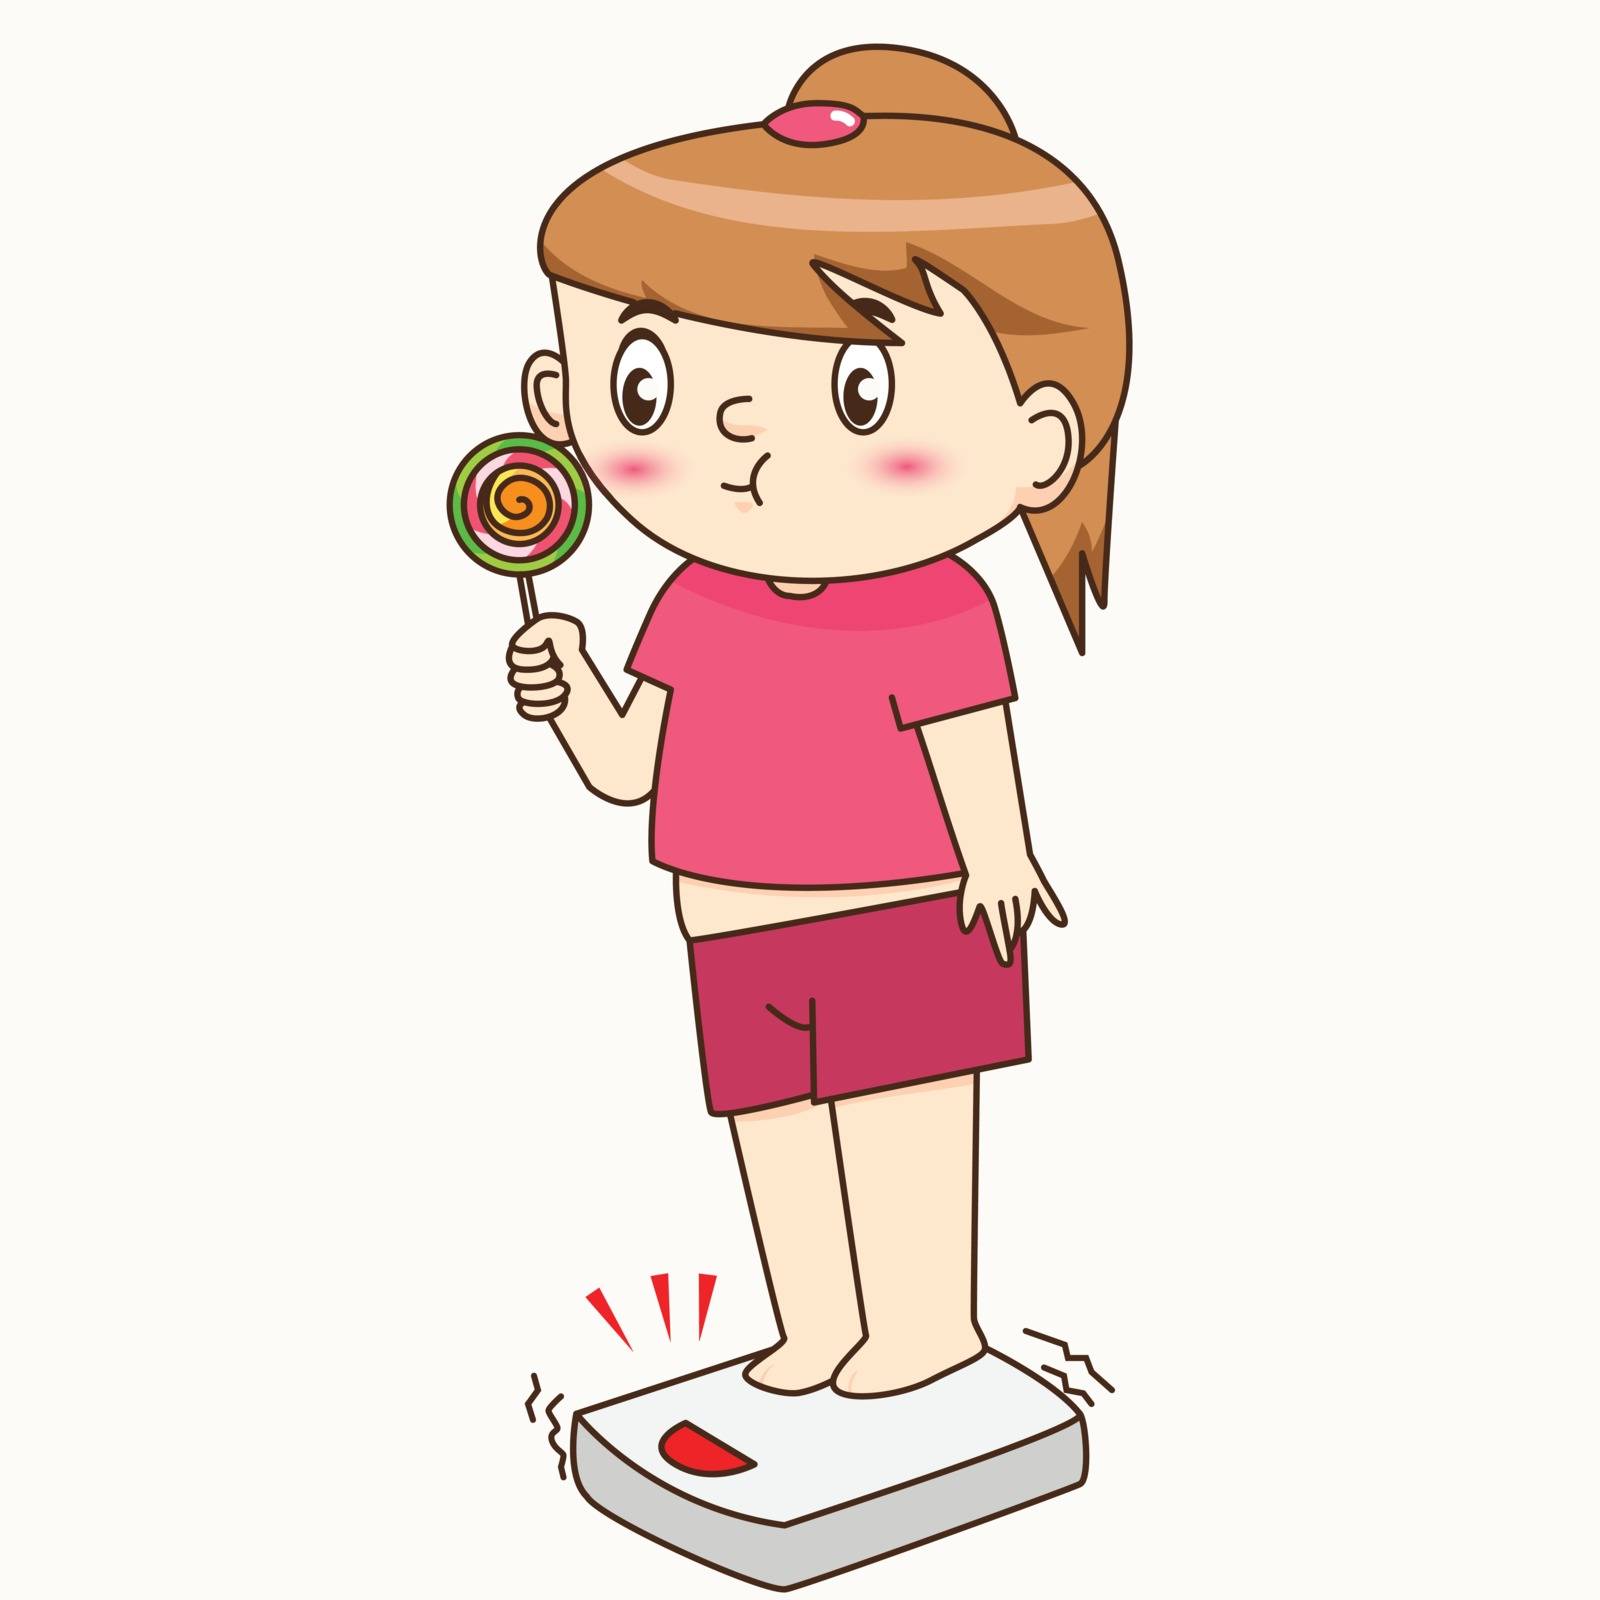 Fat girl eating lollipop and feet on the floor scales by nattio